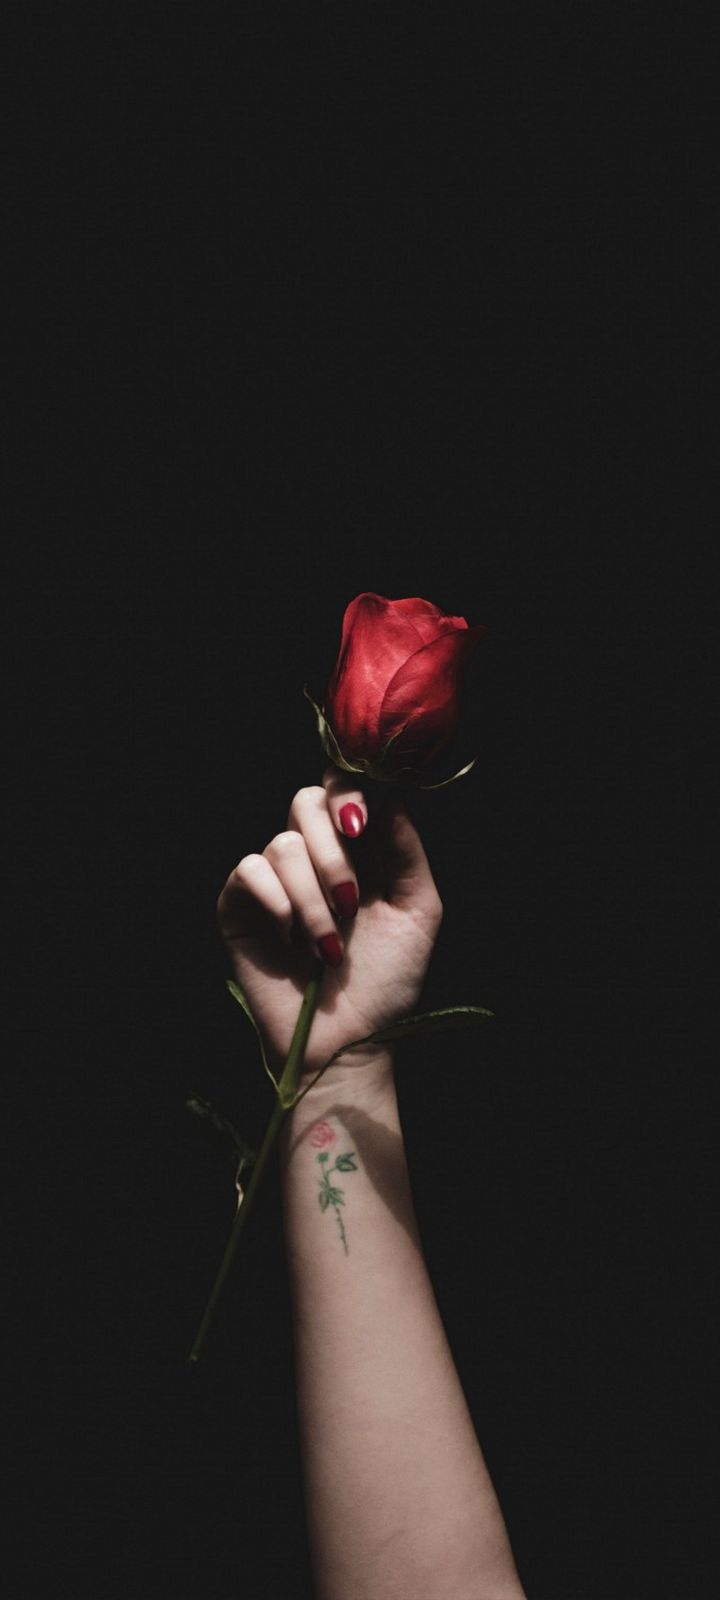 White Knife and Rose Tattoo Phone Wallpaper  Free Digital Download   Ectogasm